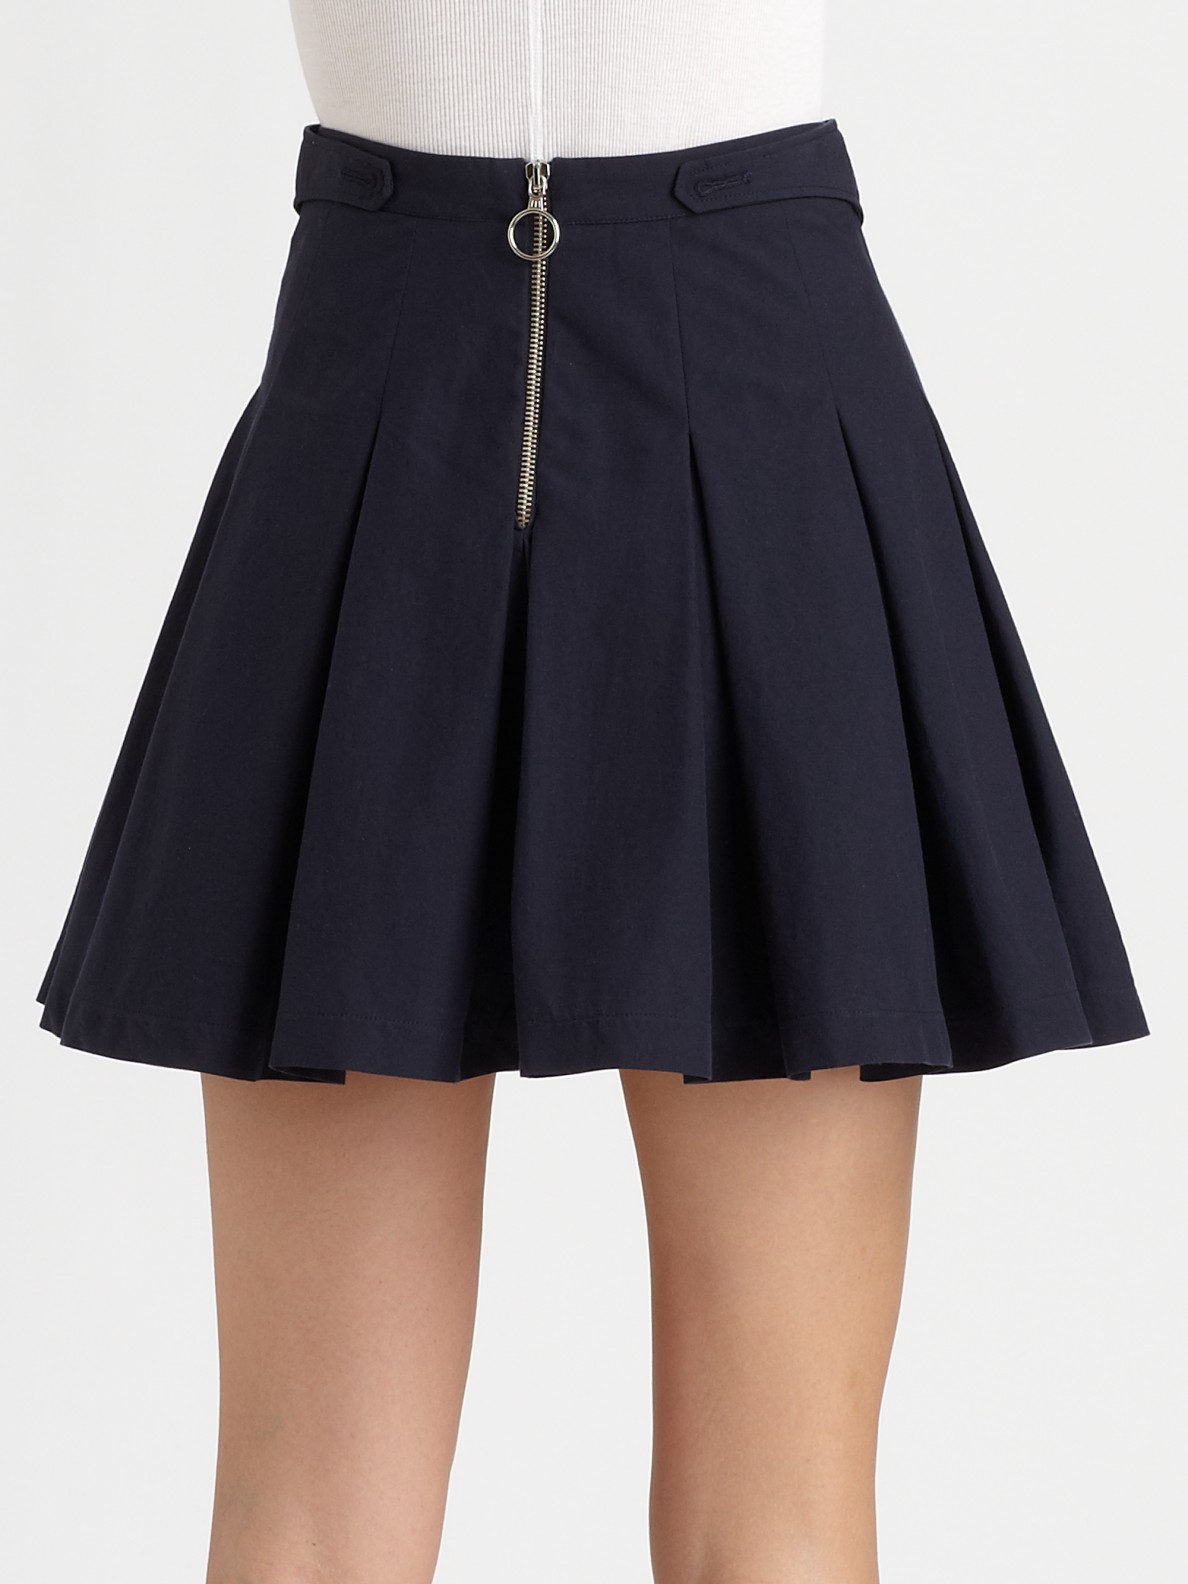 Lyst - Boy by band of outsiders Cheerleader Skirt in Blue